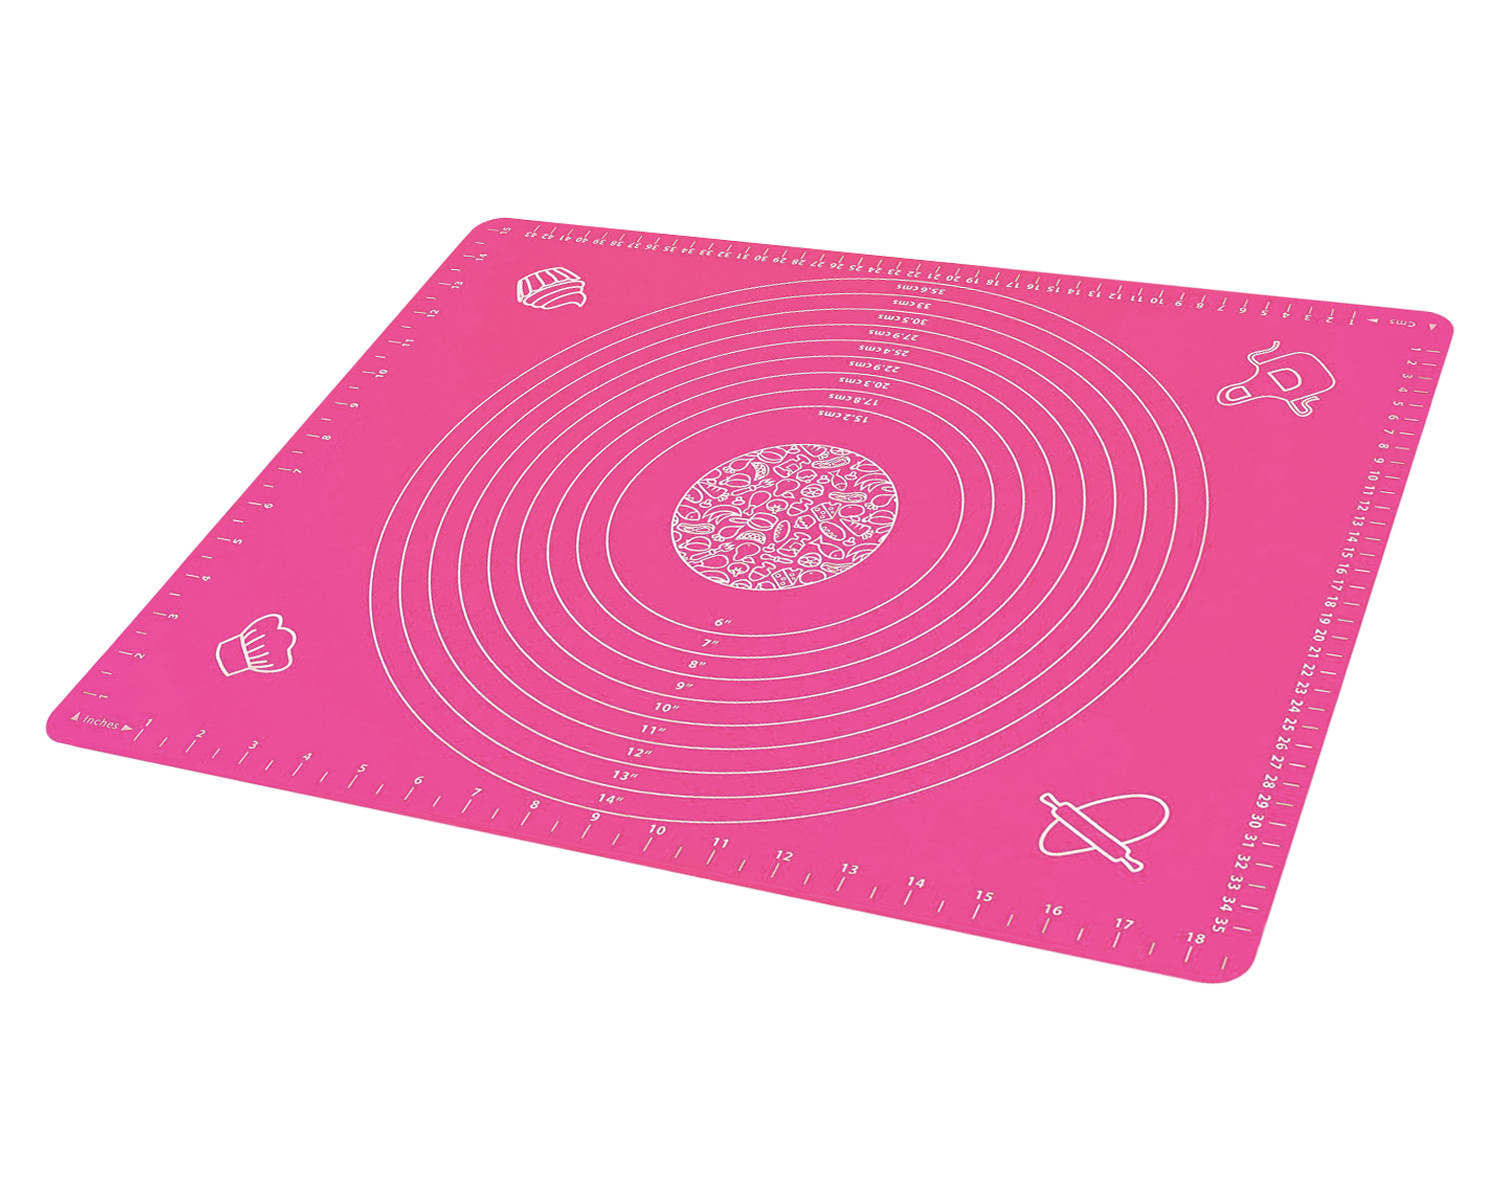 Kuber Industries Baking Mat|Silicone Non-Stick Stretchable Kneading Mat|Fondant Rolling Mat For Kitchen,Roti,Chapati,Cake,19 x 16 Inche (Pink)